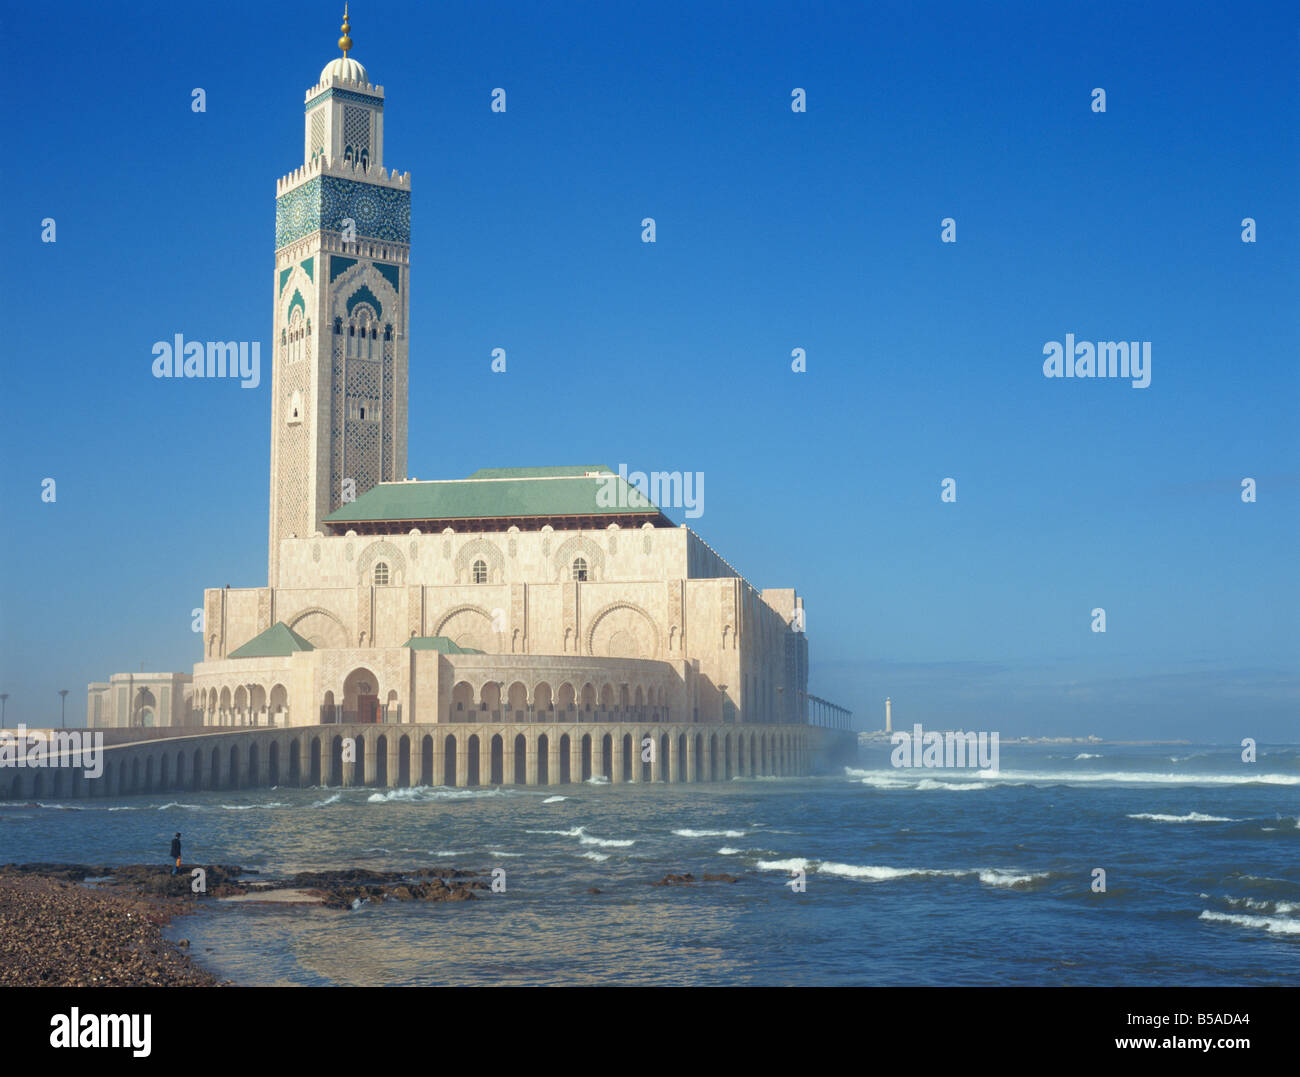 The Hassan II Mosque, Casablanca, Morocco, North Africa, Africa Stock Photo